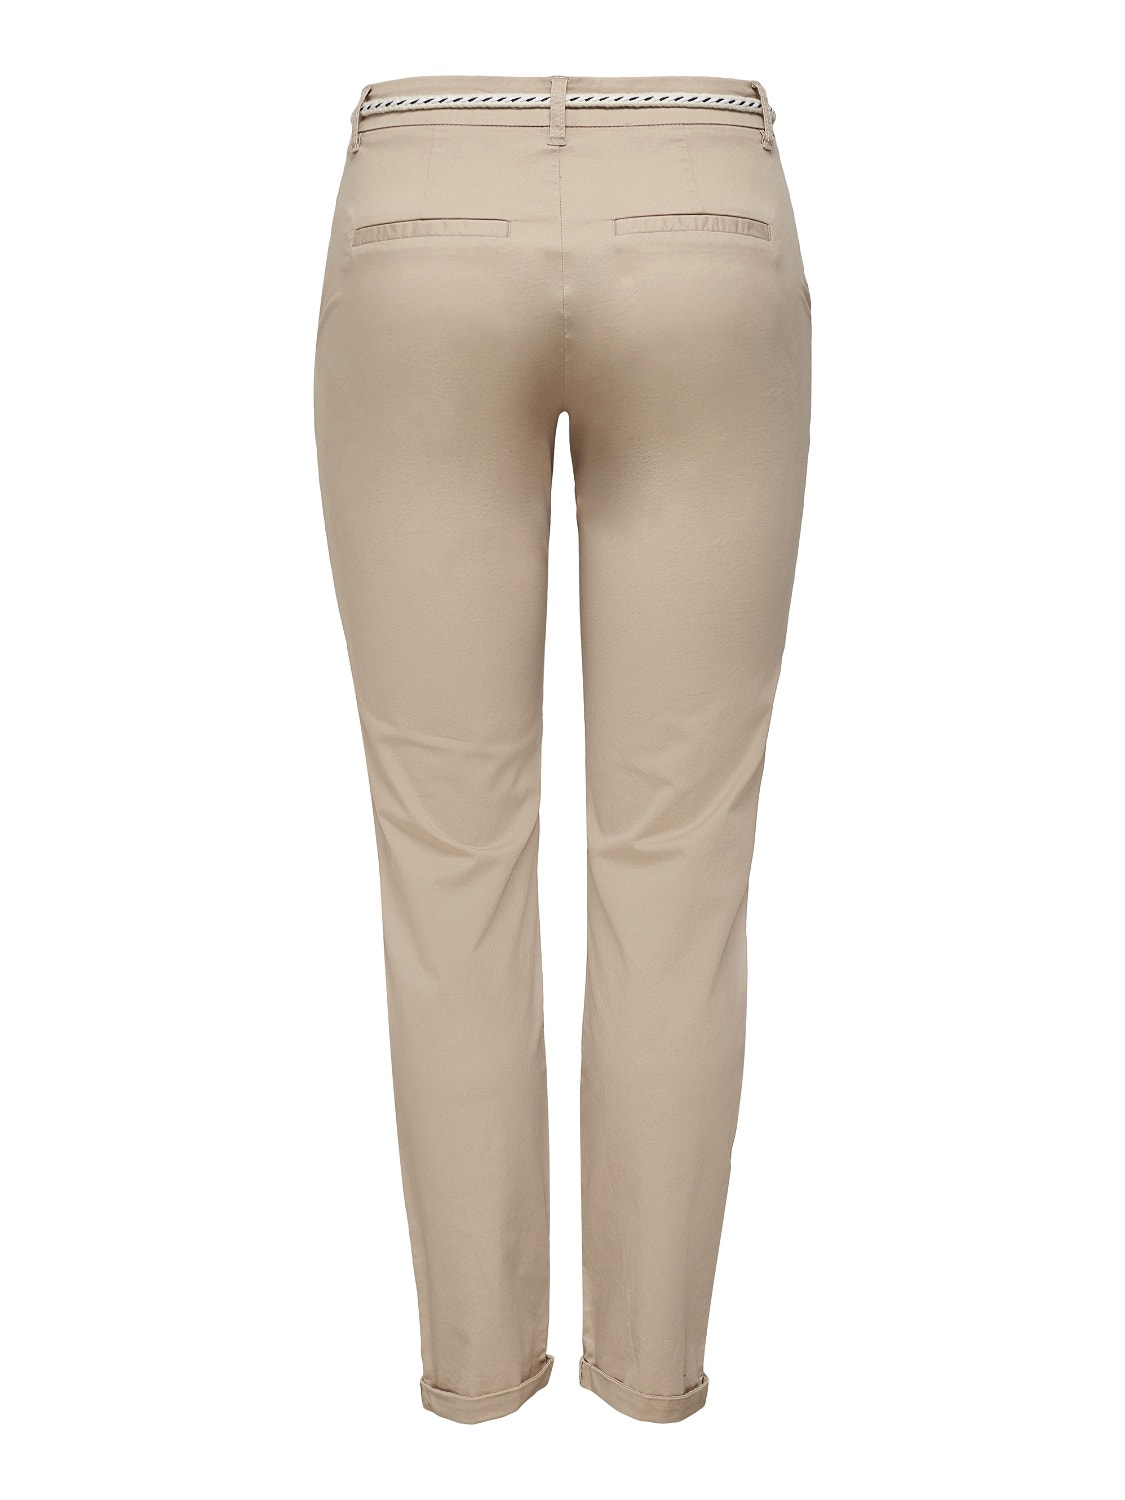 ONLY Classique Chinos -Rugby Tan - 15218519